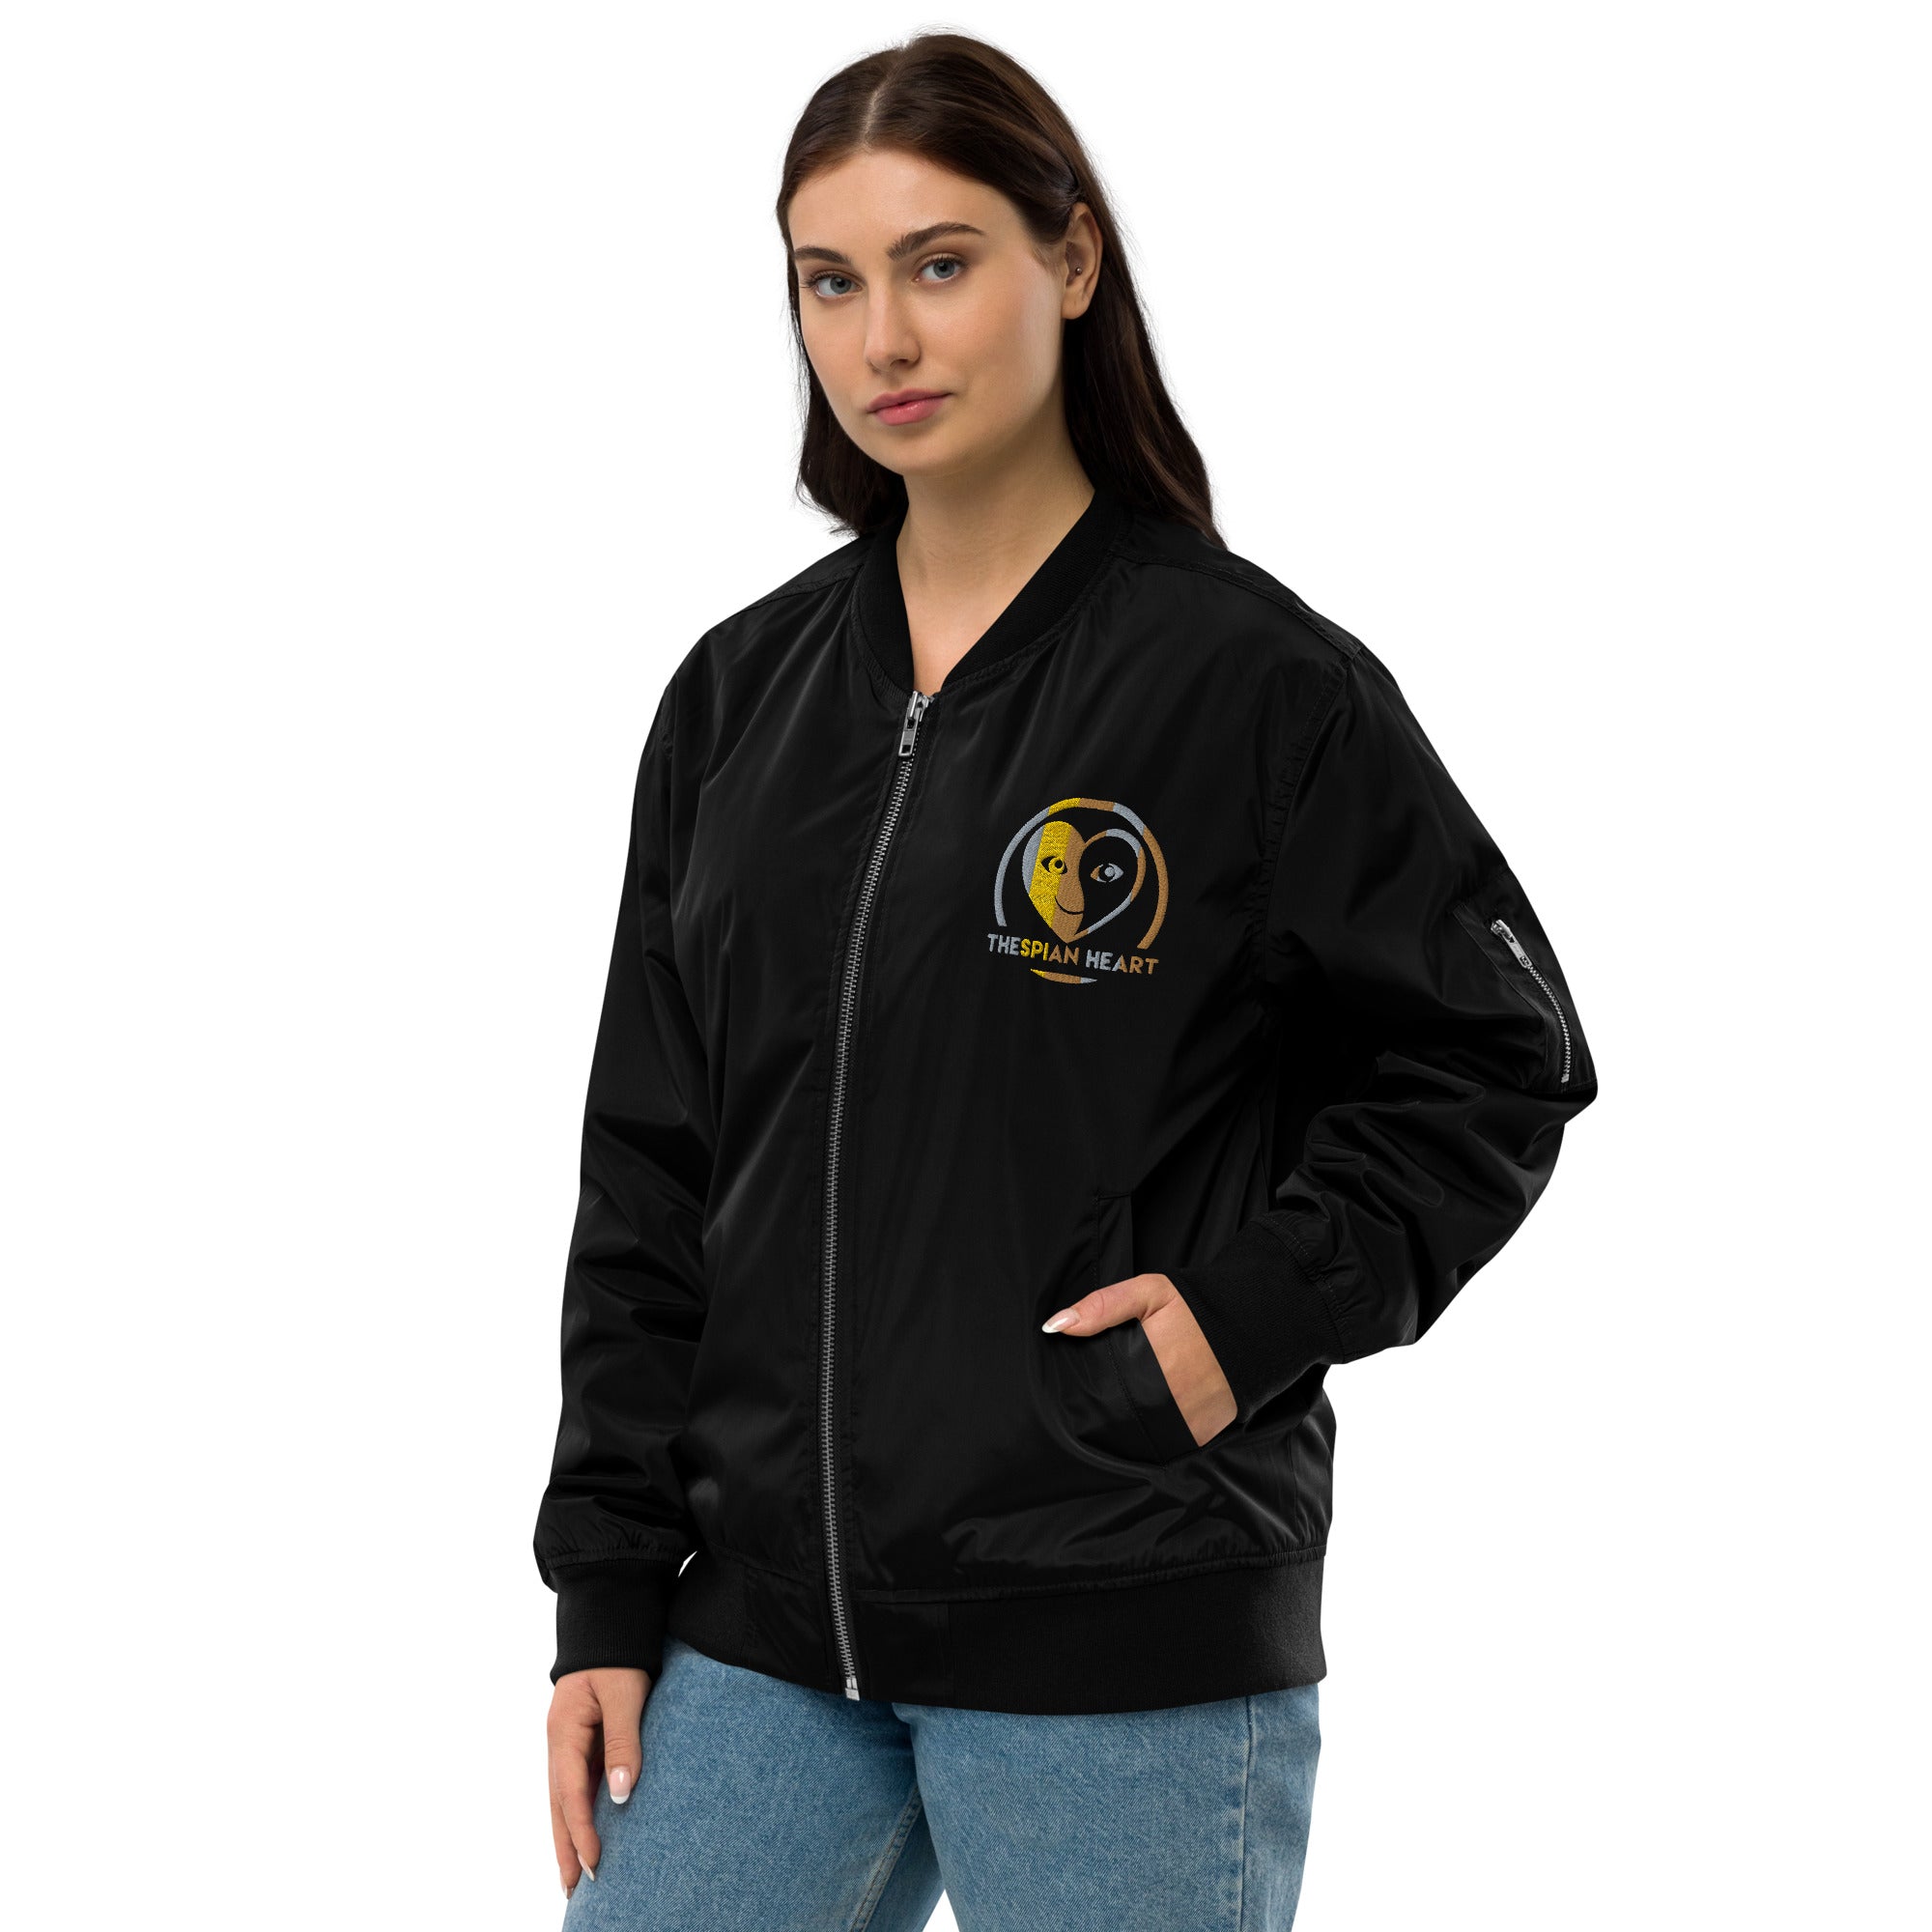 Strong Female Protagonist - Premium Recycled Bomber Jacket